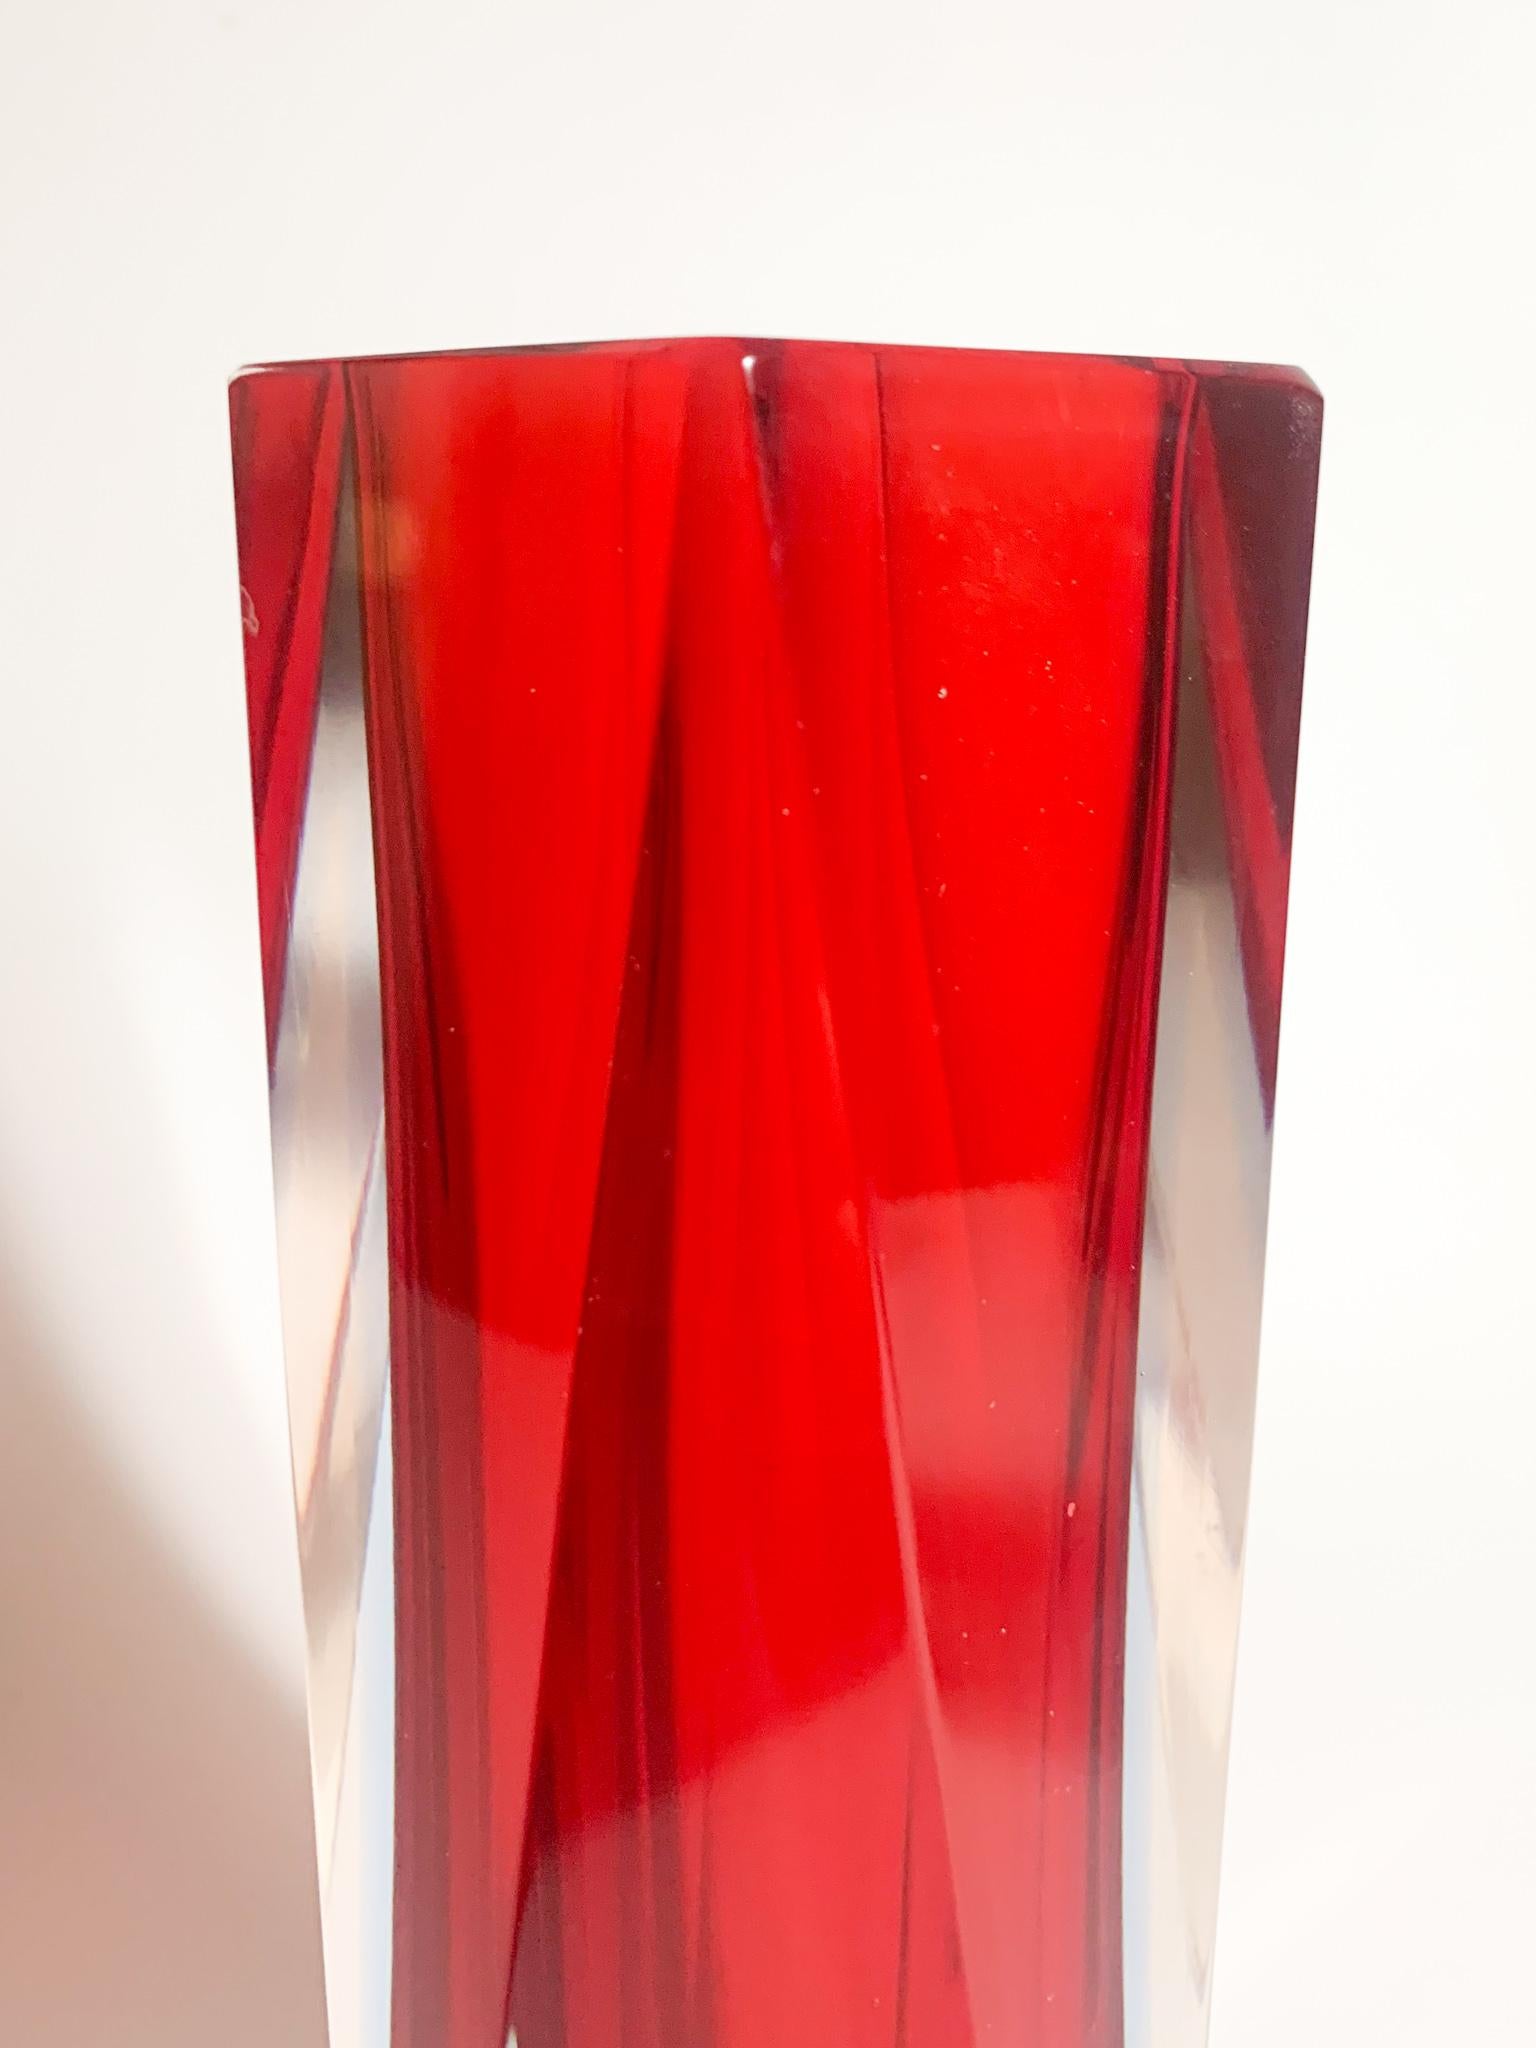 Mid-Century Modern Italy Geometric Vase in Red & Blue Murano Glass Attributed to Flavio Poli 1970s For Sale